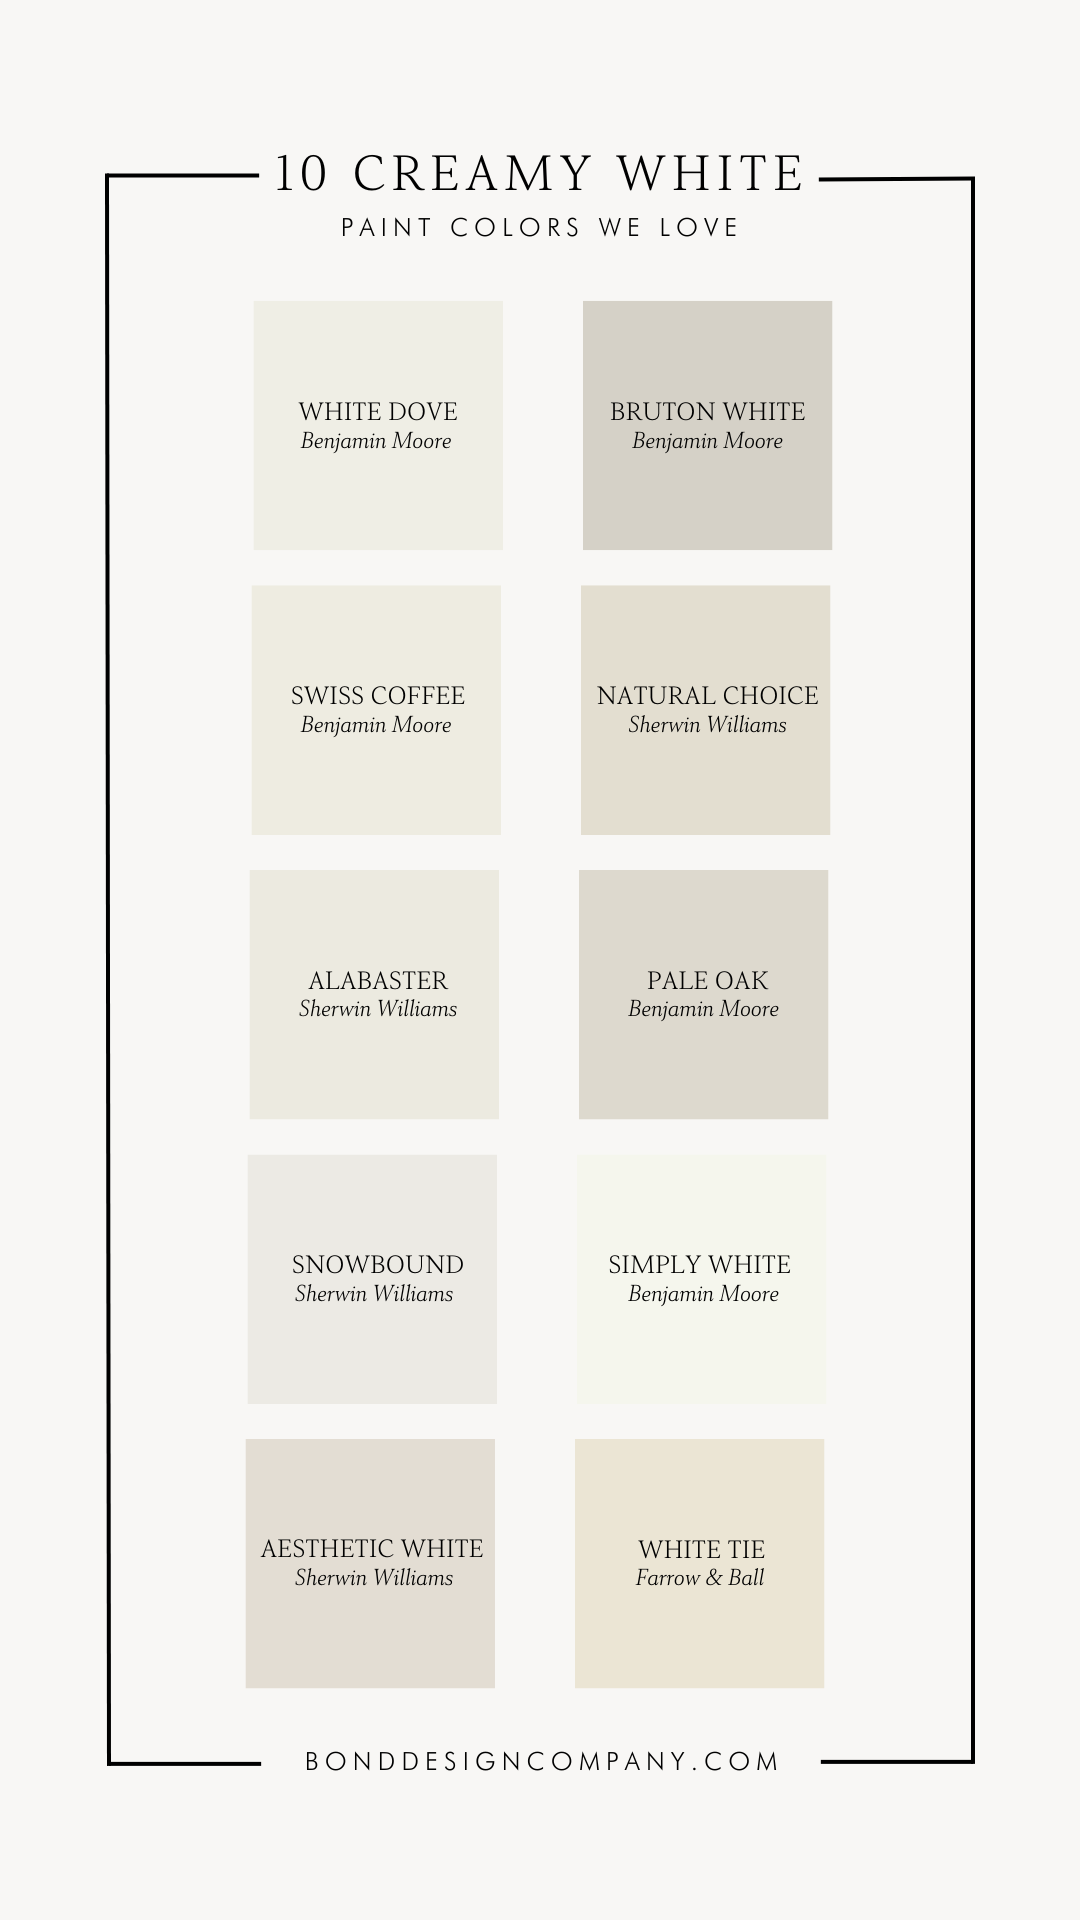 Best White Paint Colors, Favorite White Paint Colors, Creamy White Paint, Benjamin Moore, Sherwin Williams, Farrow & Ball